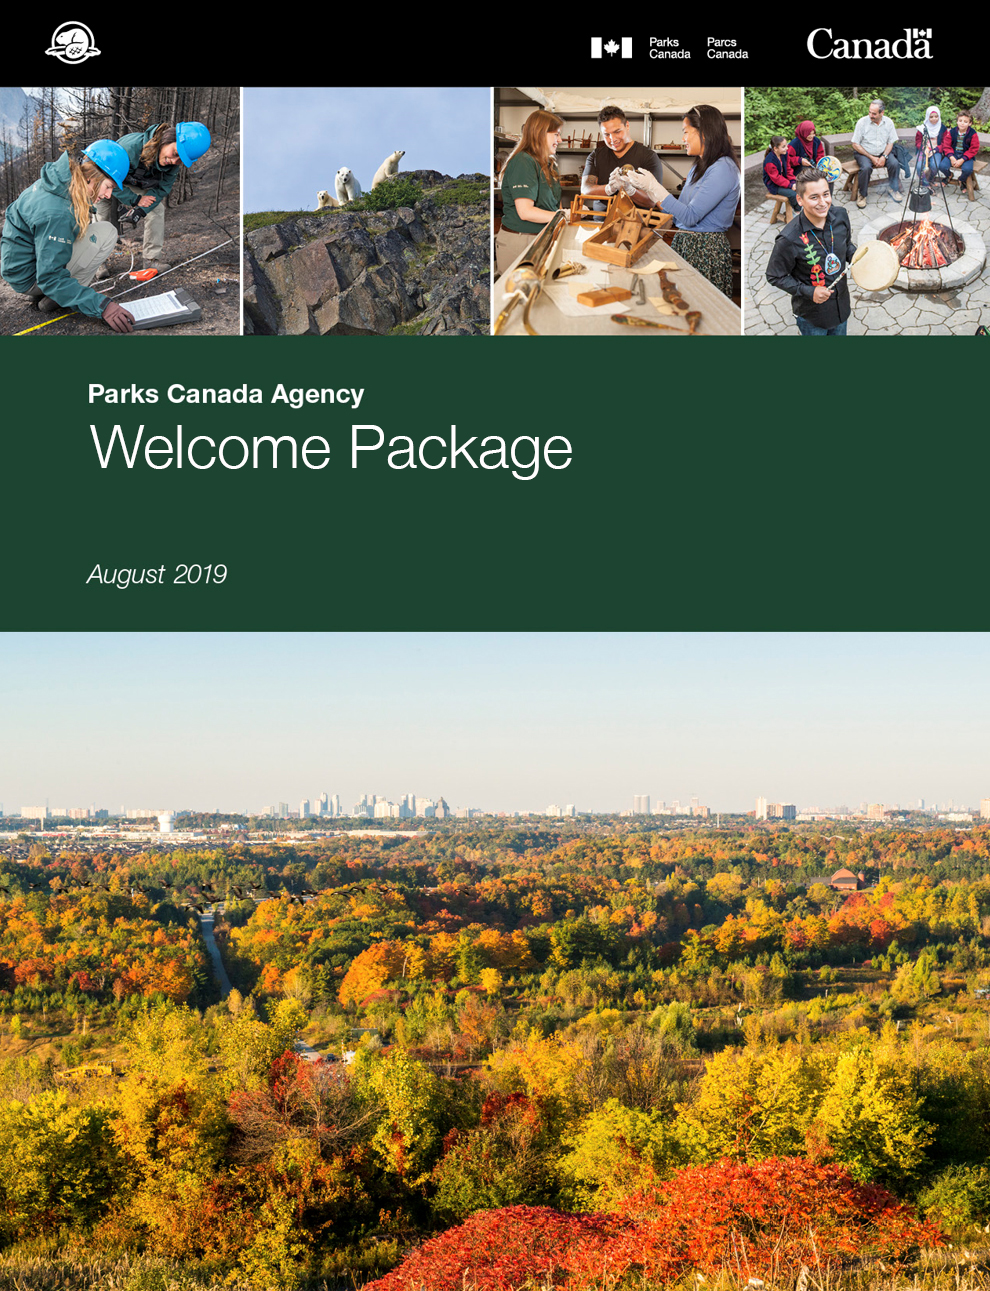 Five images: Two Parks Canada staff at a burn site. Three polar bears. Three people handling artifacts. A group of people with hand drums. An urban forest. A green rectangle with white text that says: Parks Canada Agency Welcome Package August 2019.